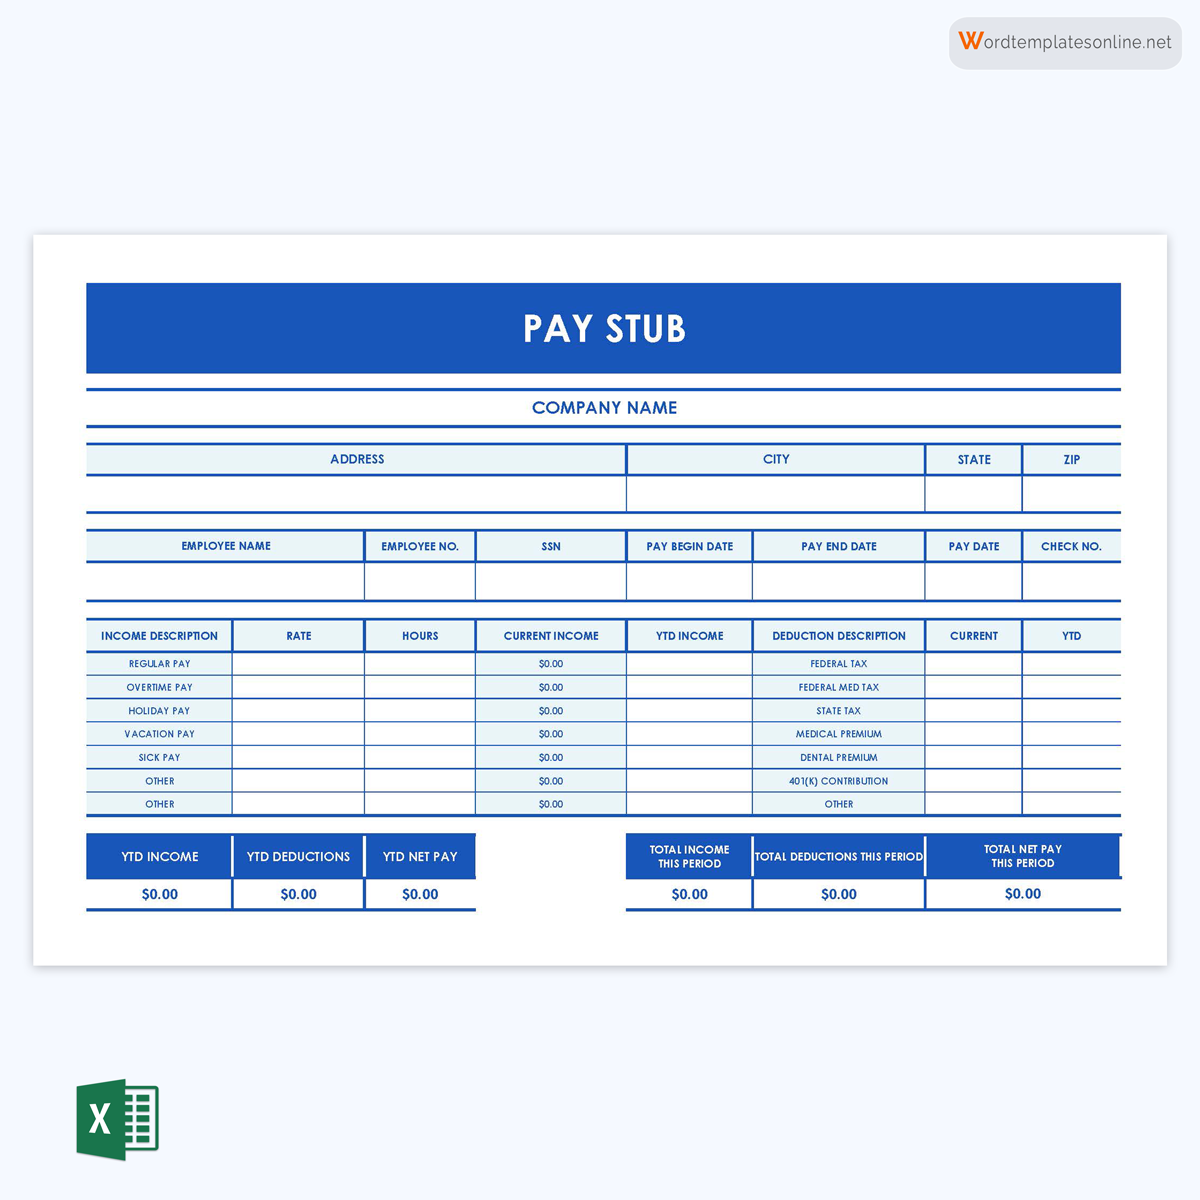 Free Customizable Pay Stub Template 03 as Excel Sheet